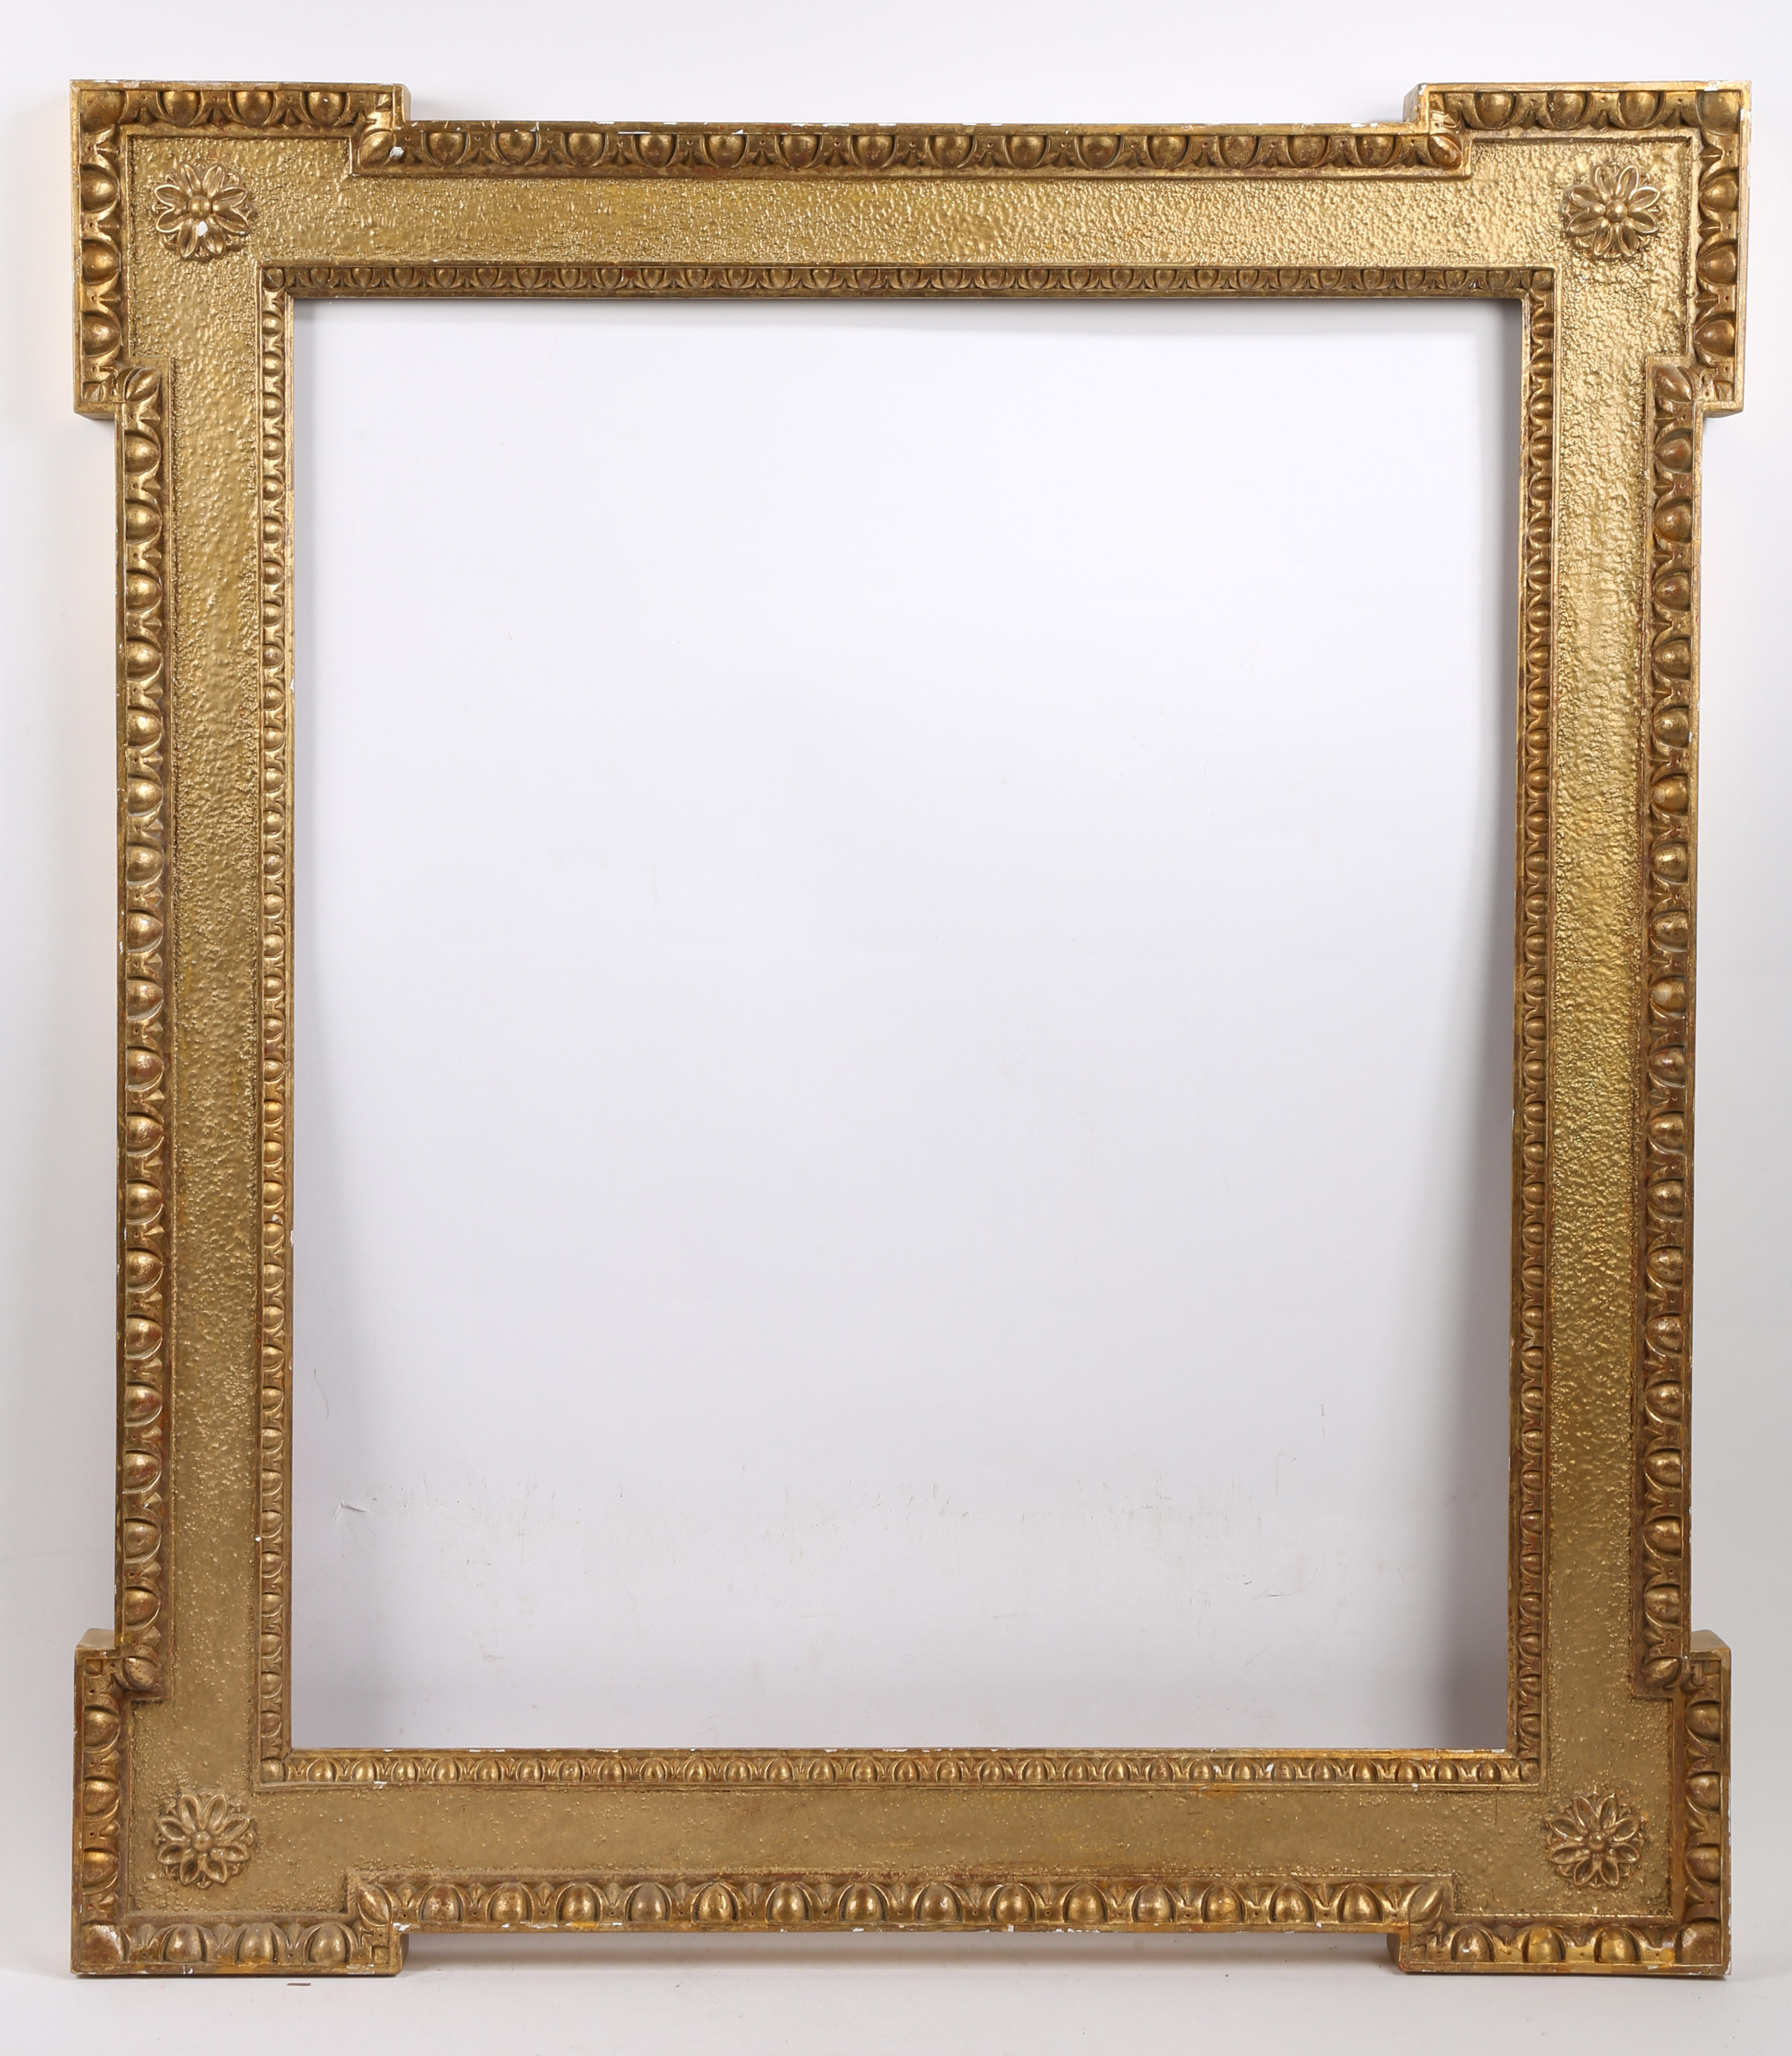 20th century 'Kent' picture frame - rebate size 31in x 26in - Image 2 of 3